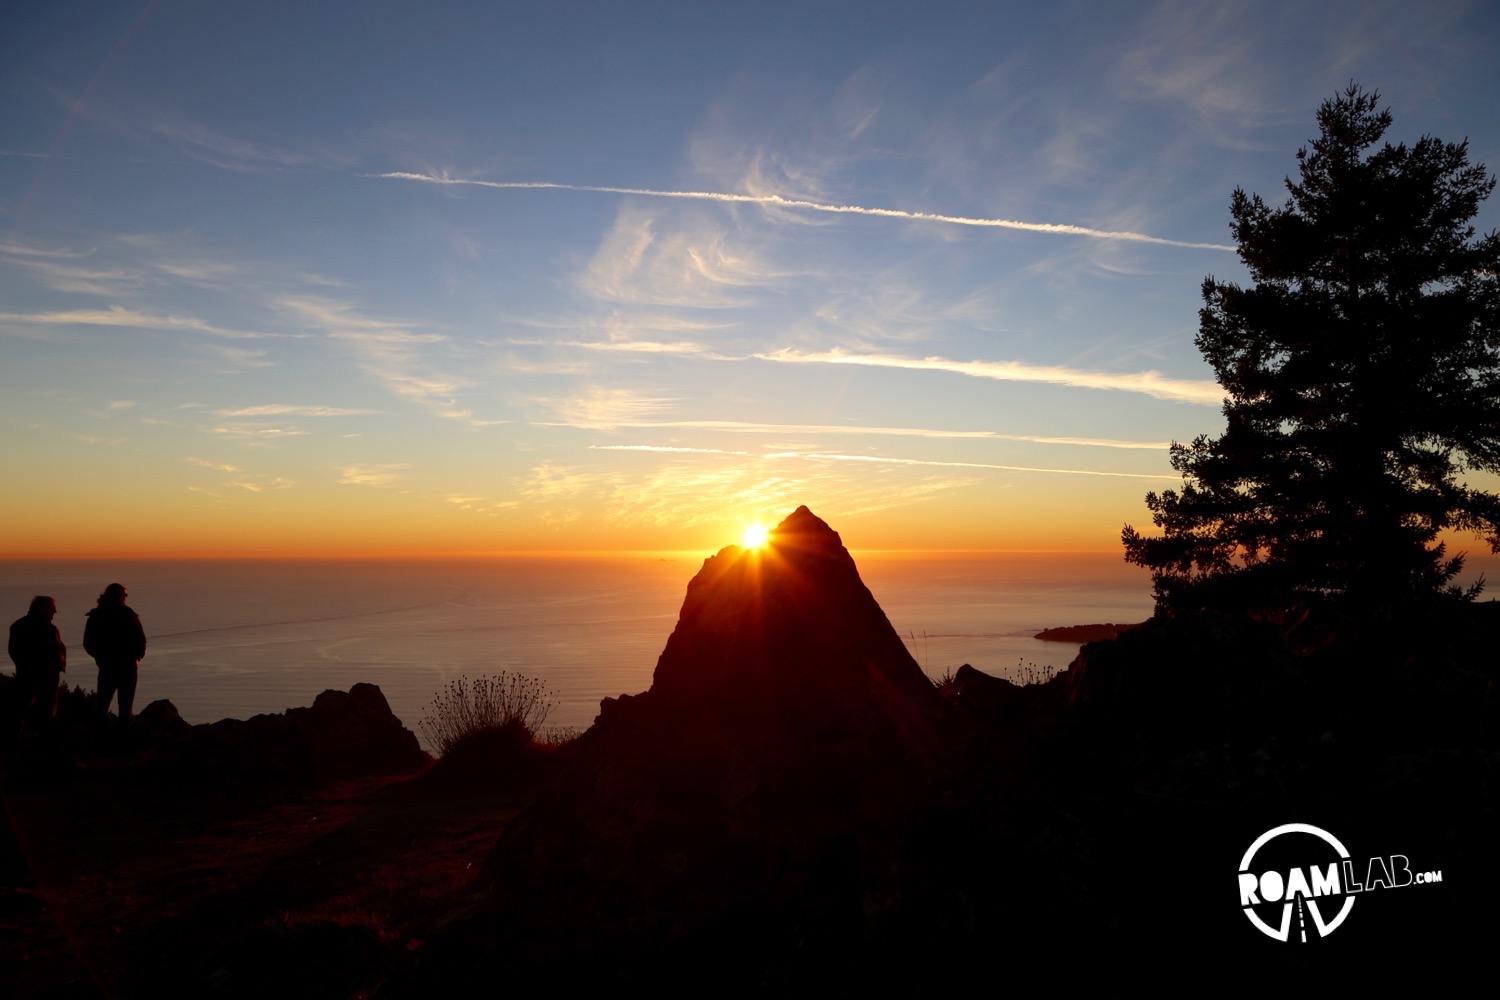 Mount Tamalpais towers over the north bay, with vistas of both the Pacific Ocean and the Bay. Along with hiking, it is an ideal stop for sunset.